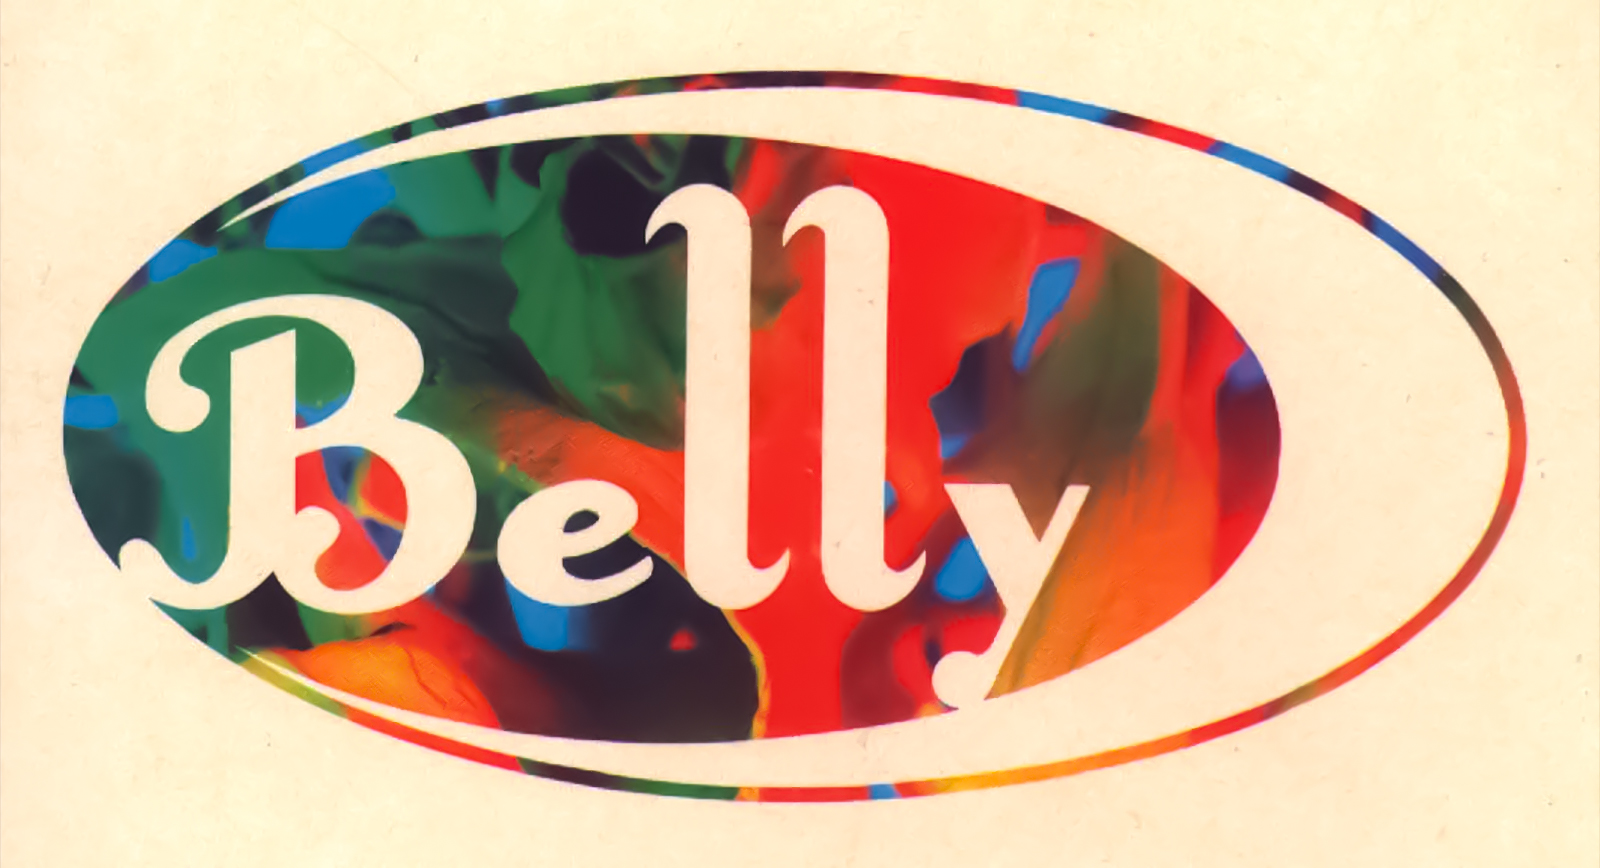 Belly-2016-Tour-Concert-Schedule-Dates-Tickets-Tanya-Donnely-FI